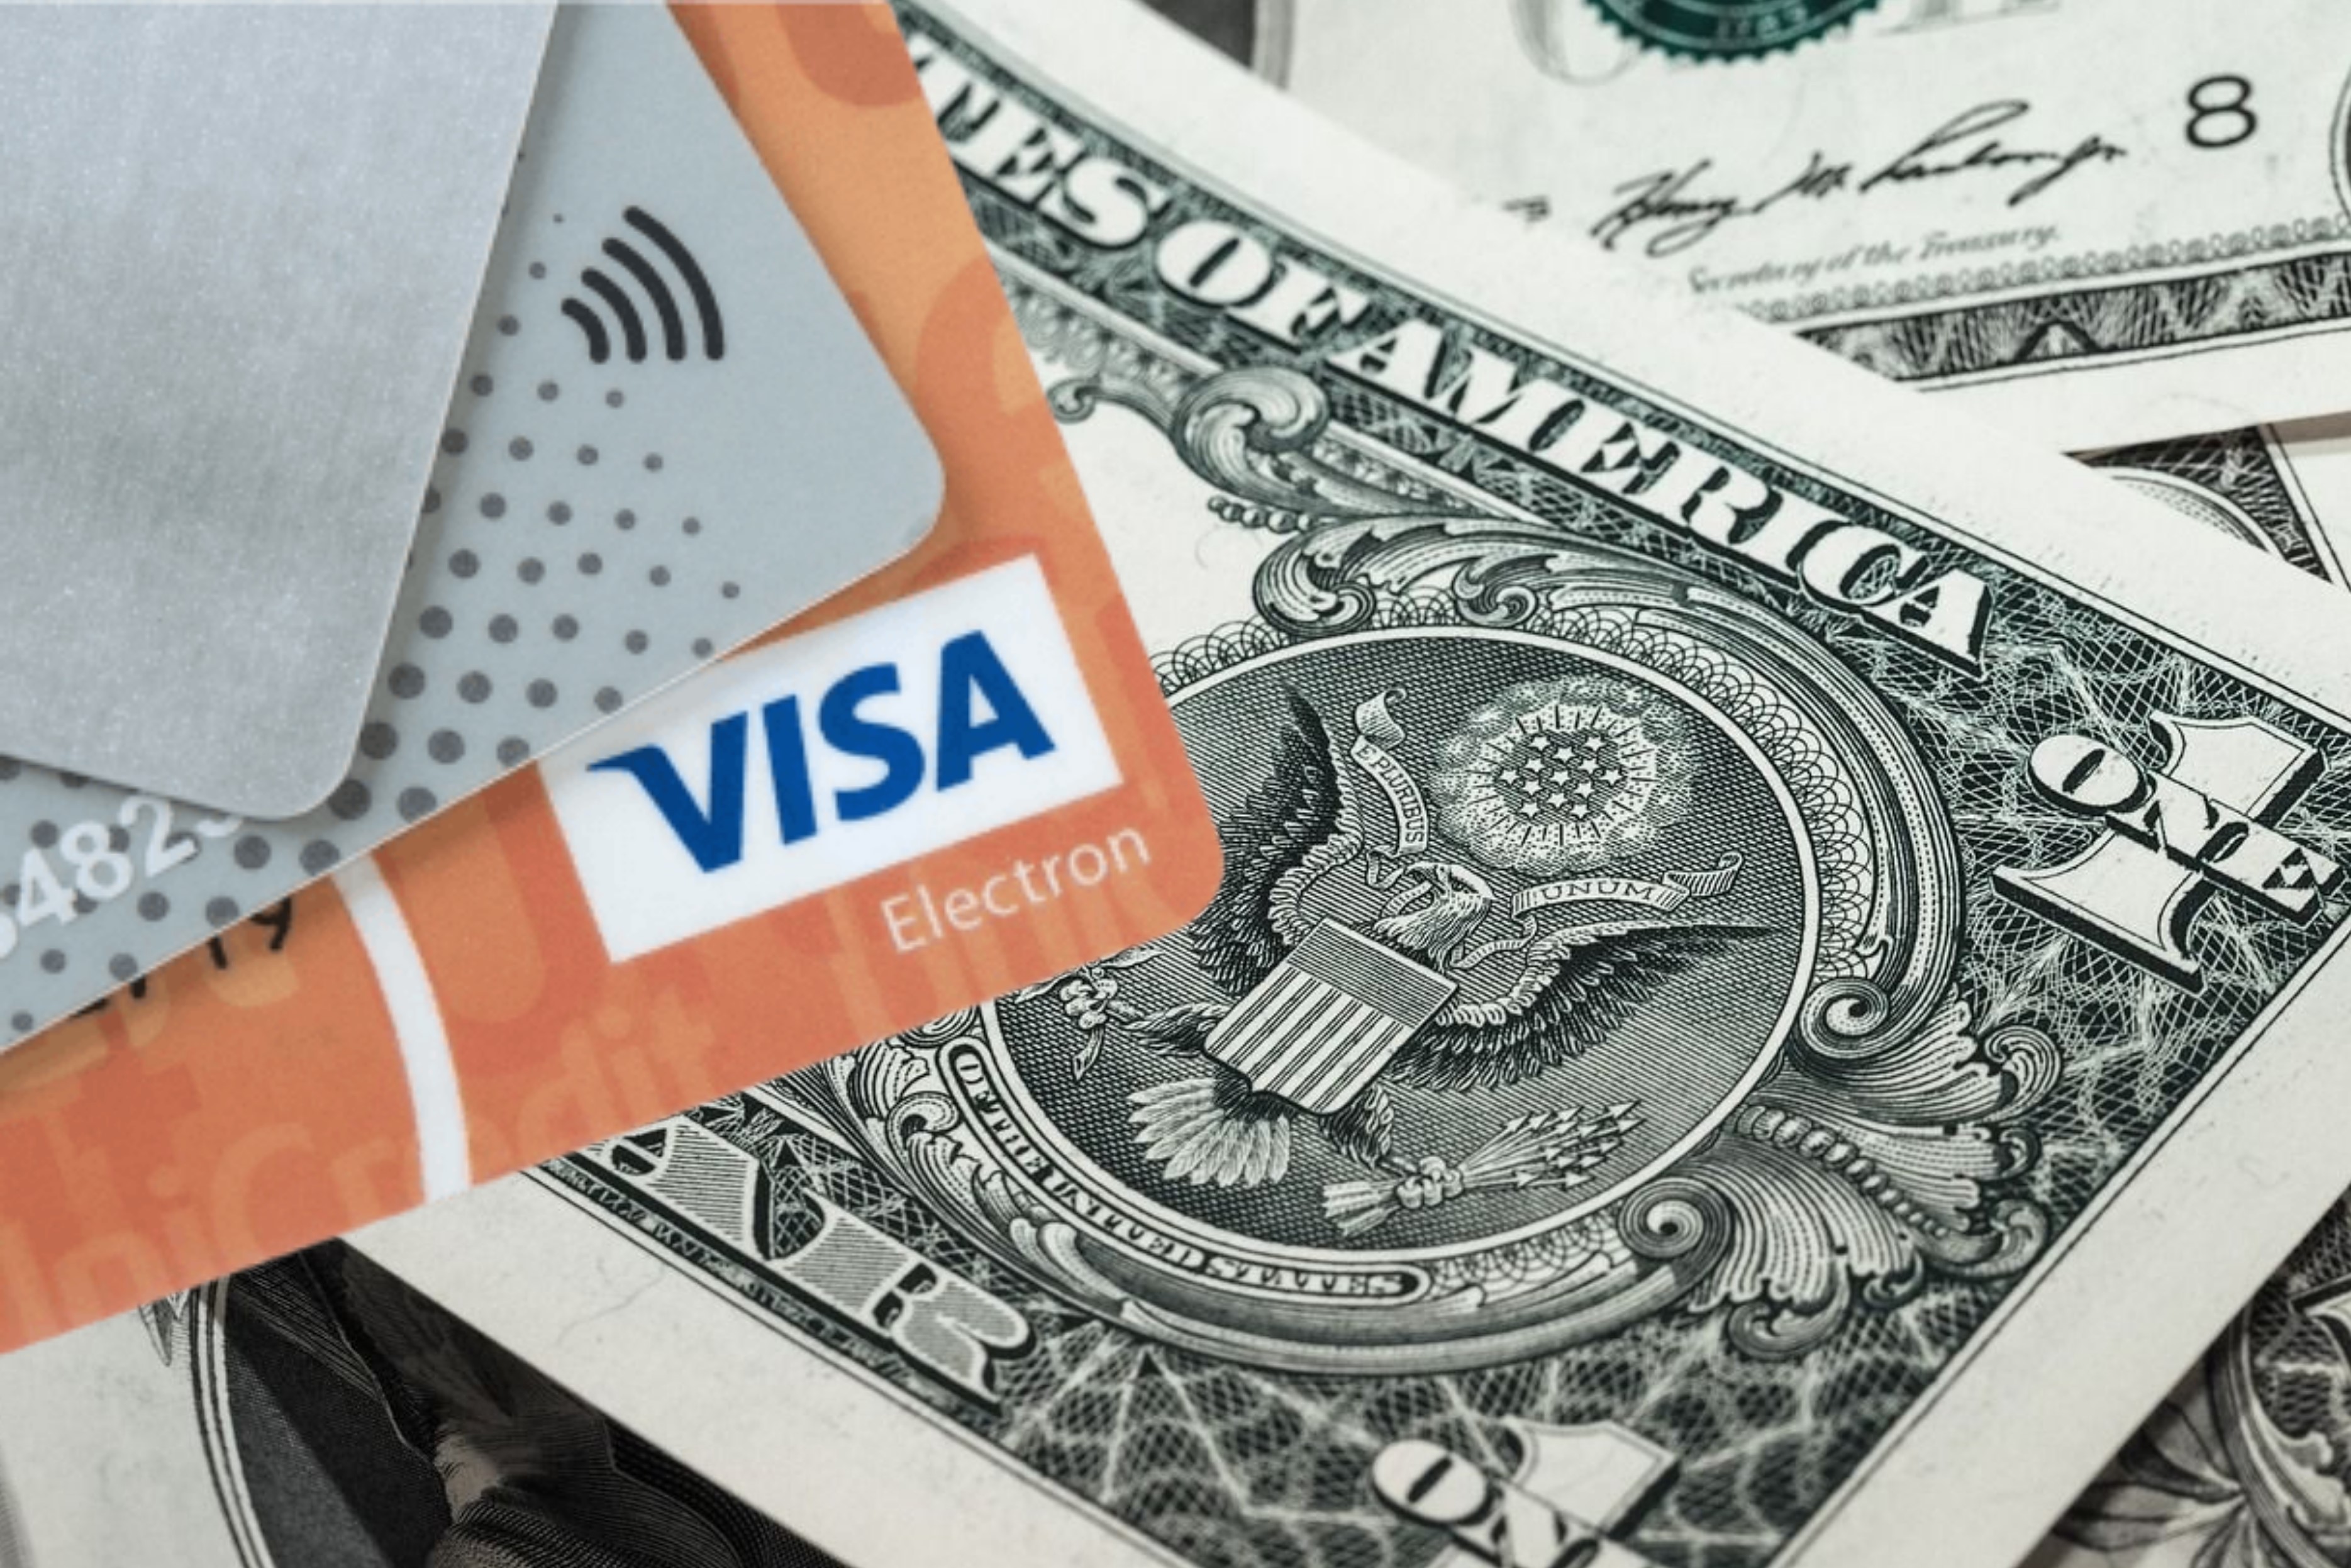 Visa NYSE:V Stock Outlook, Recent Performance and Analysis